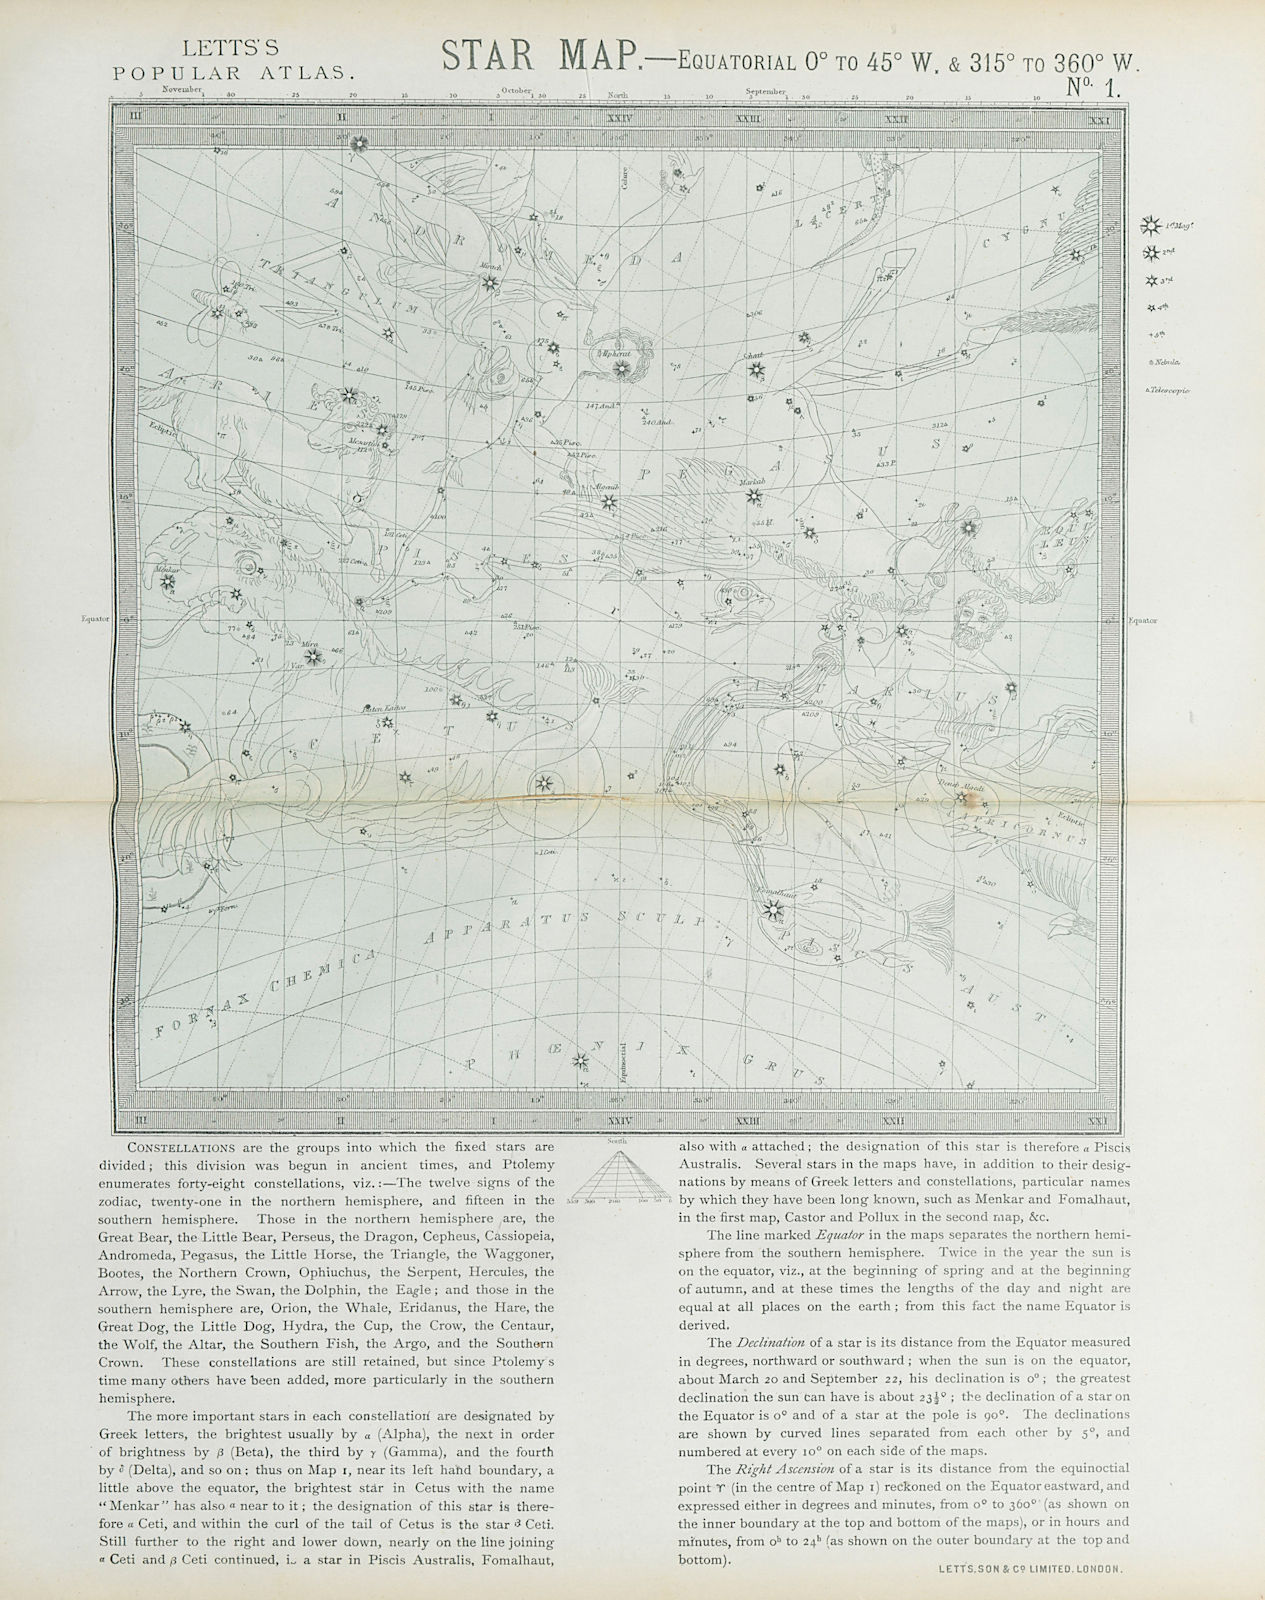 ASTRONOMY CELESTIAL Star map chart signs Spring Aries Aquarius Pisces LETTS 1883